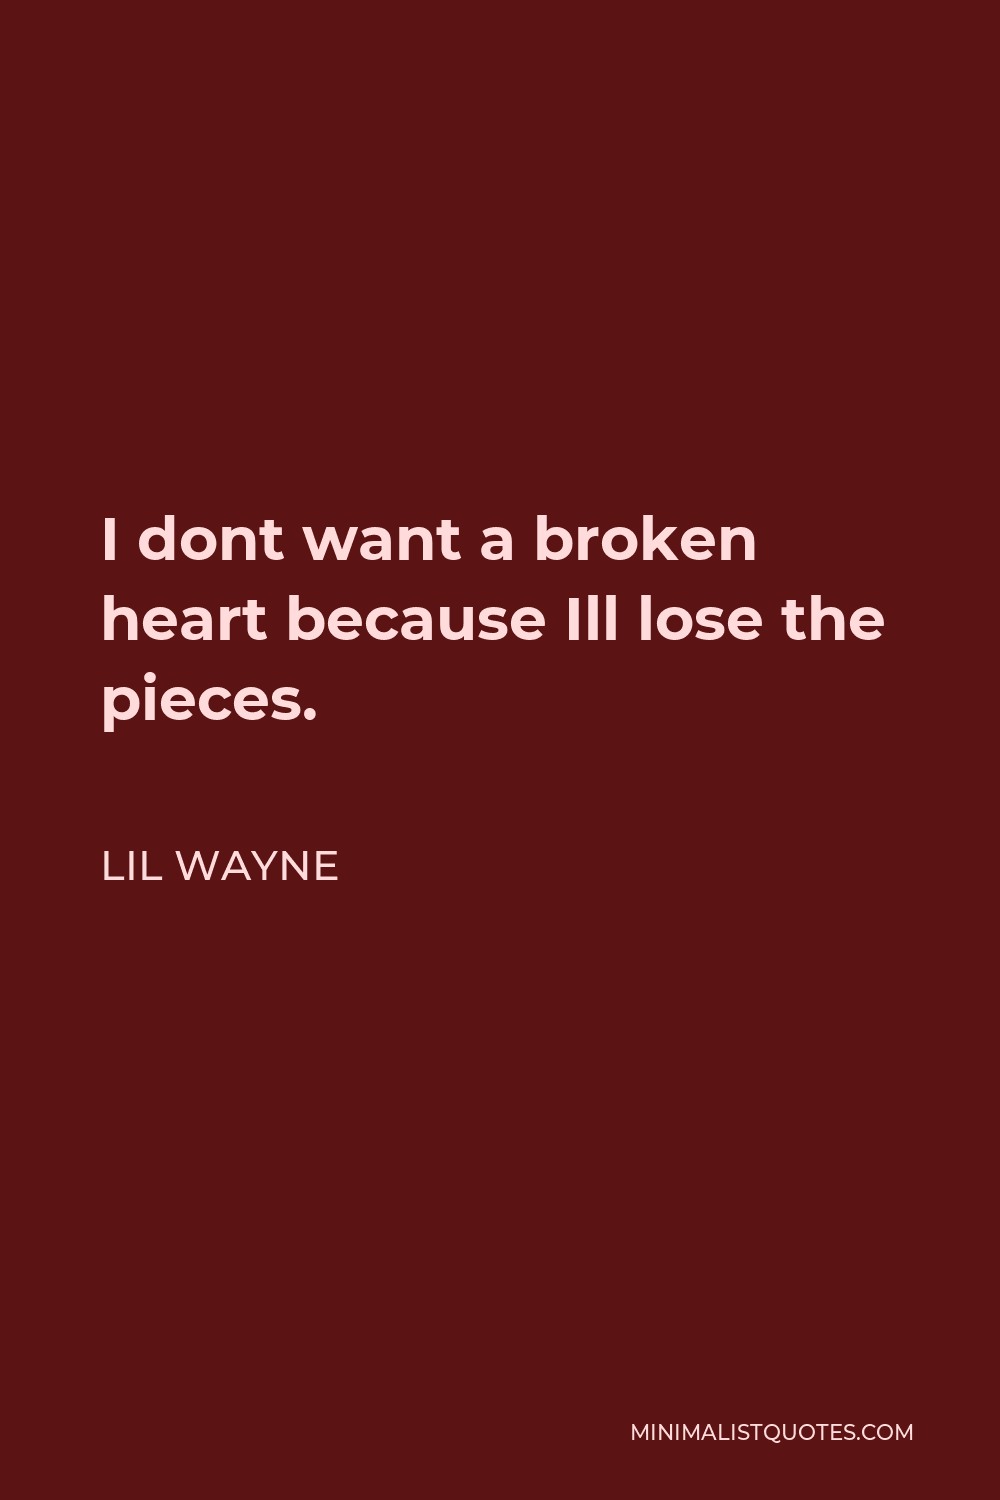 Lil Wayne Quote - I dont want a broken heart because Ill lose the pieces.